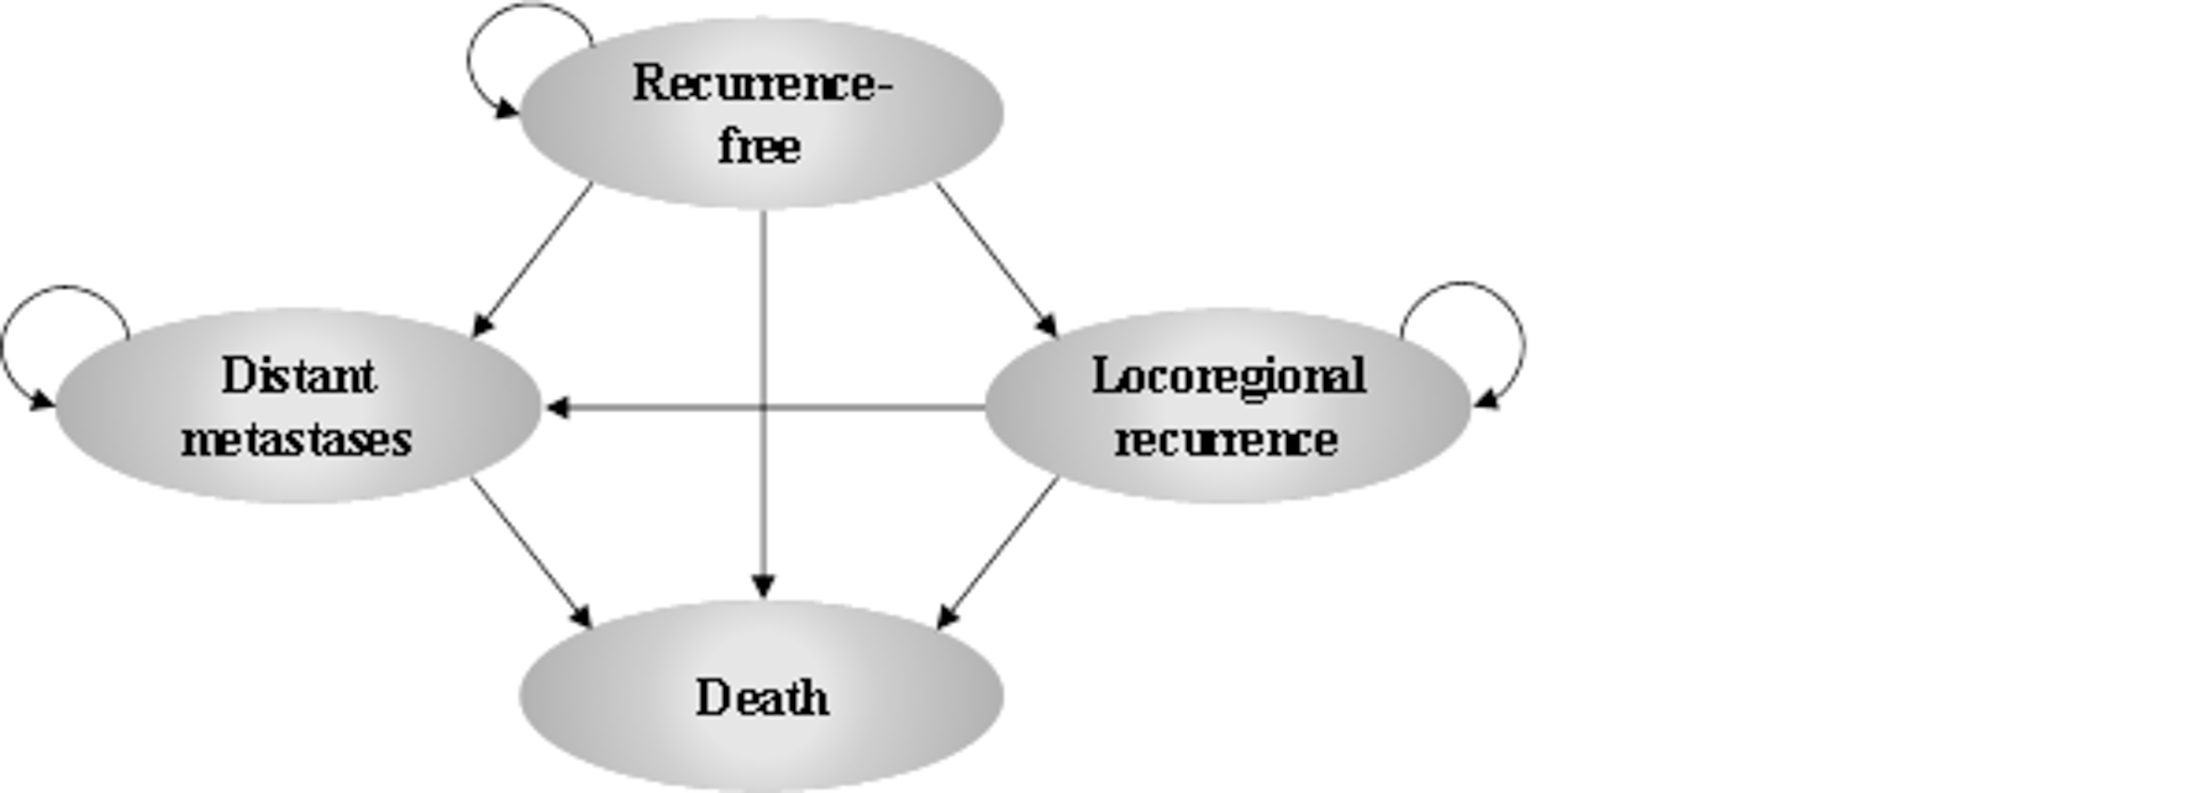 Diagram of a 4-state Markov model consisting of recurrence-free, locoregional recurrence, distant metastases, and death; and all patients can remain in their current state. Patients start in recurrence-free and can move to distant metastases or locoregional recurrence. Those in locoregional recurrence can only move to distant metastases, and those in distant metastases can only remain in their state. All states can transition to the absorbing state of death.